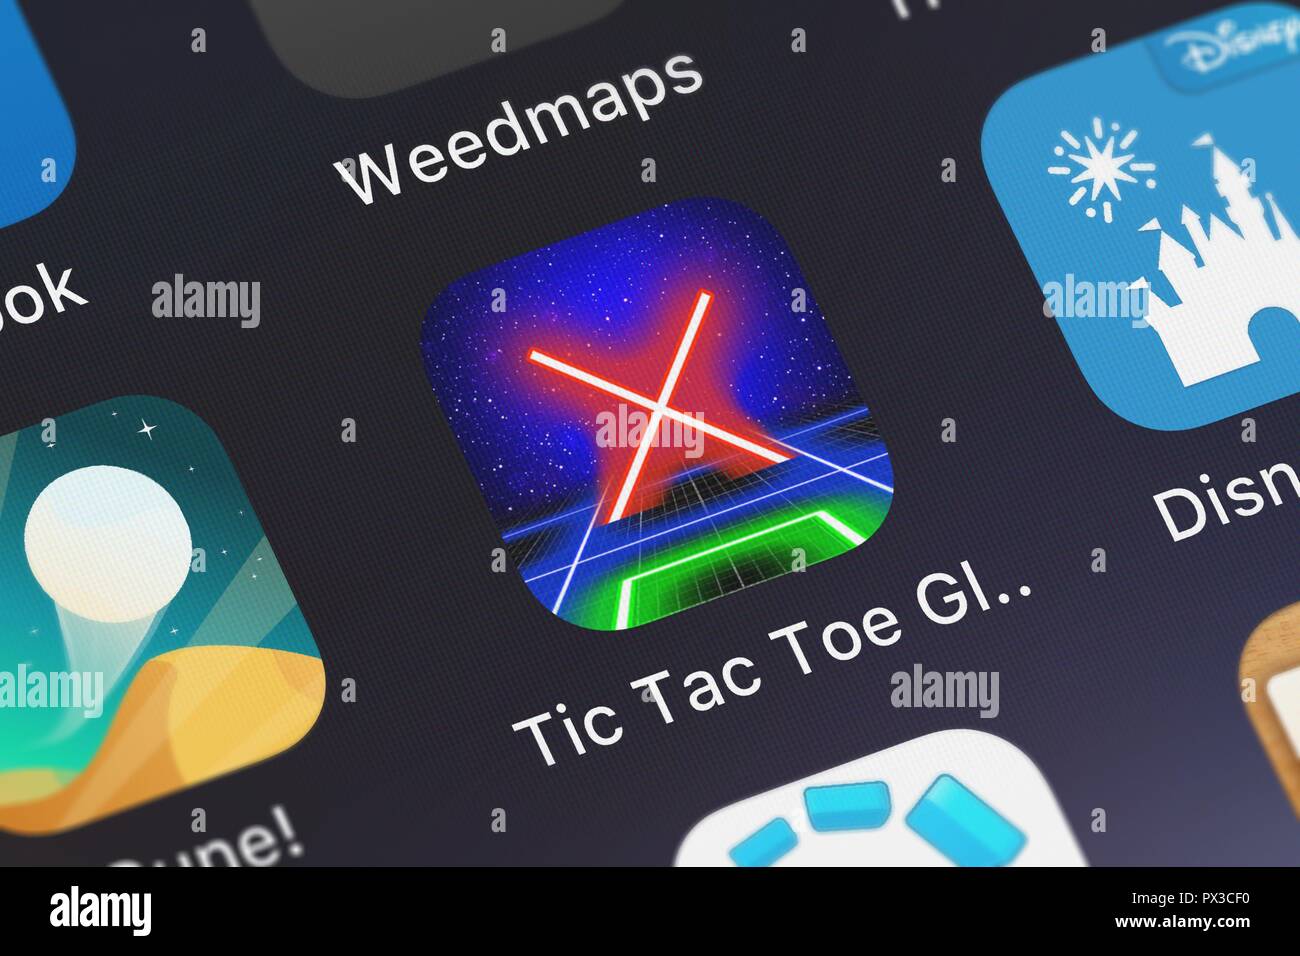 Tic Tac Toe - Glow on the App Store